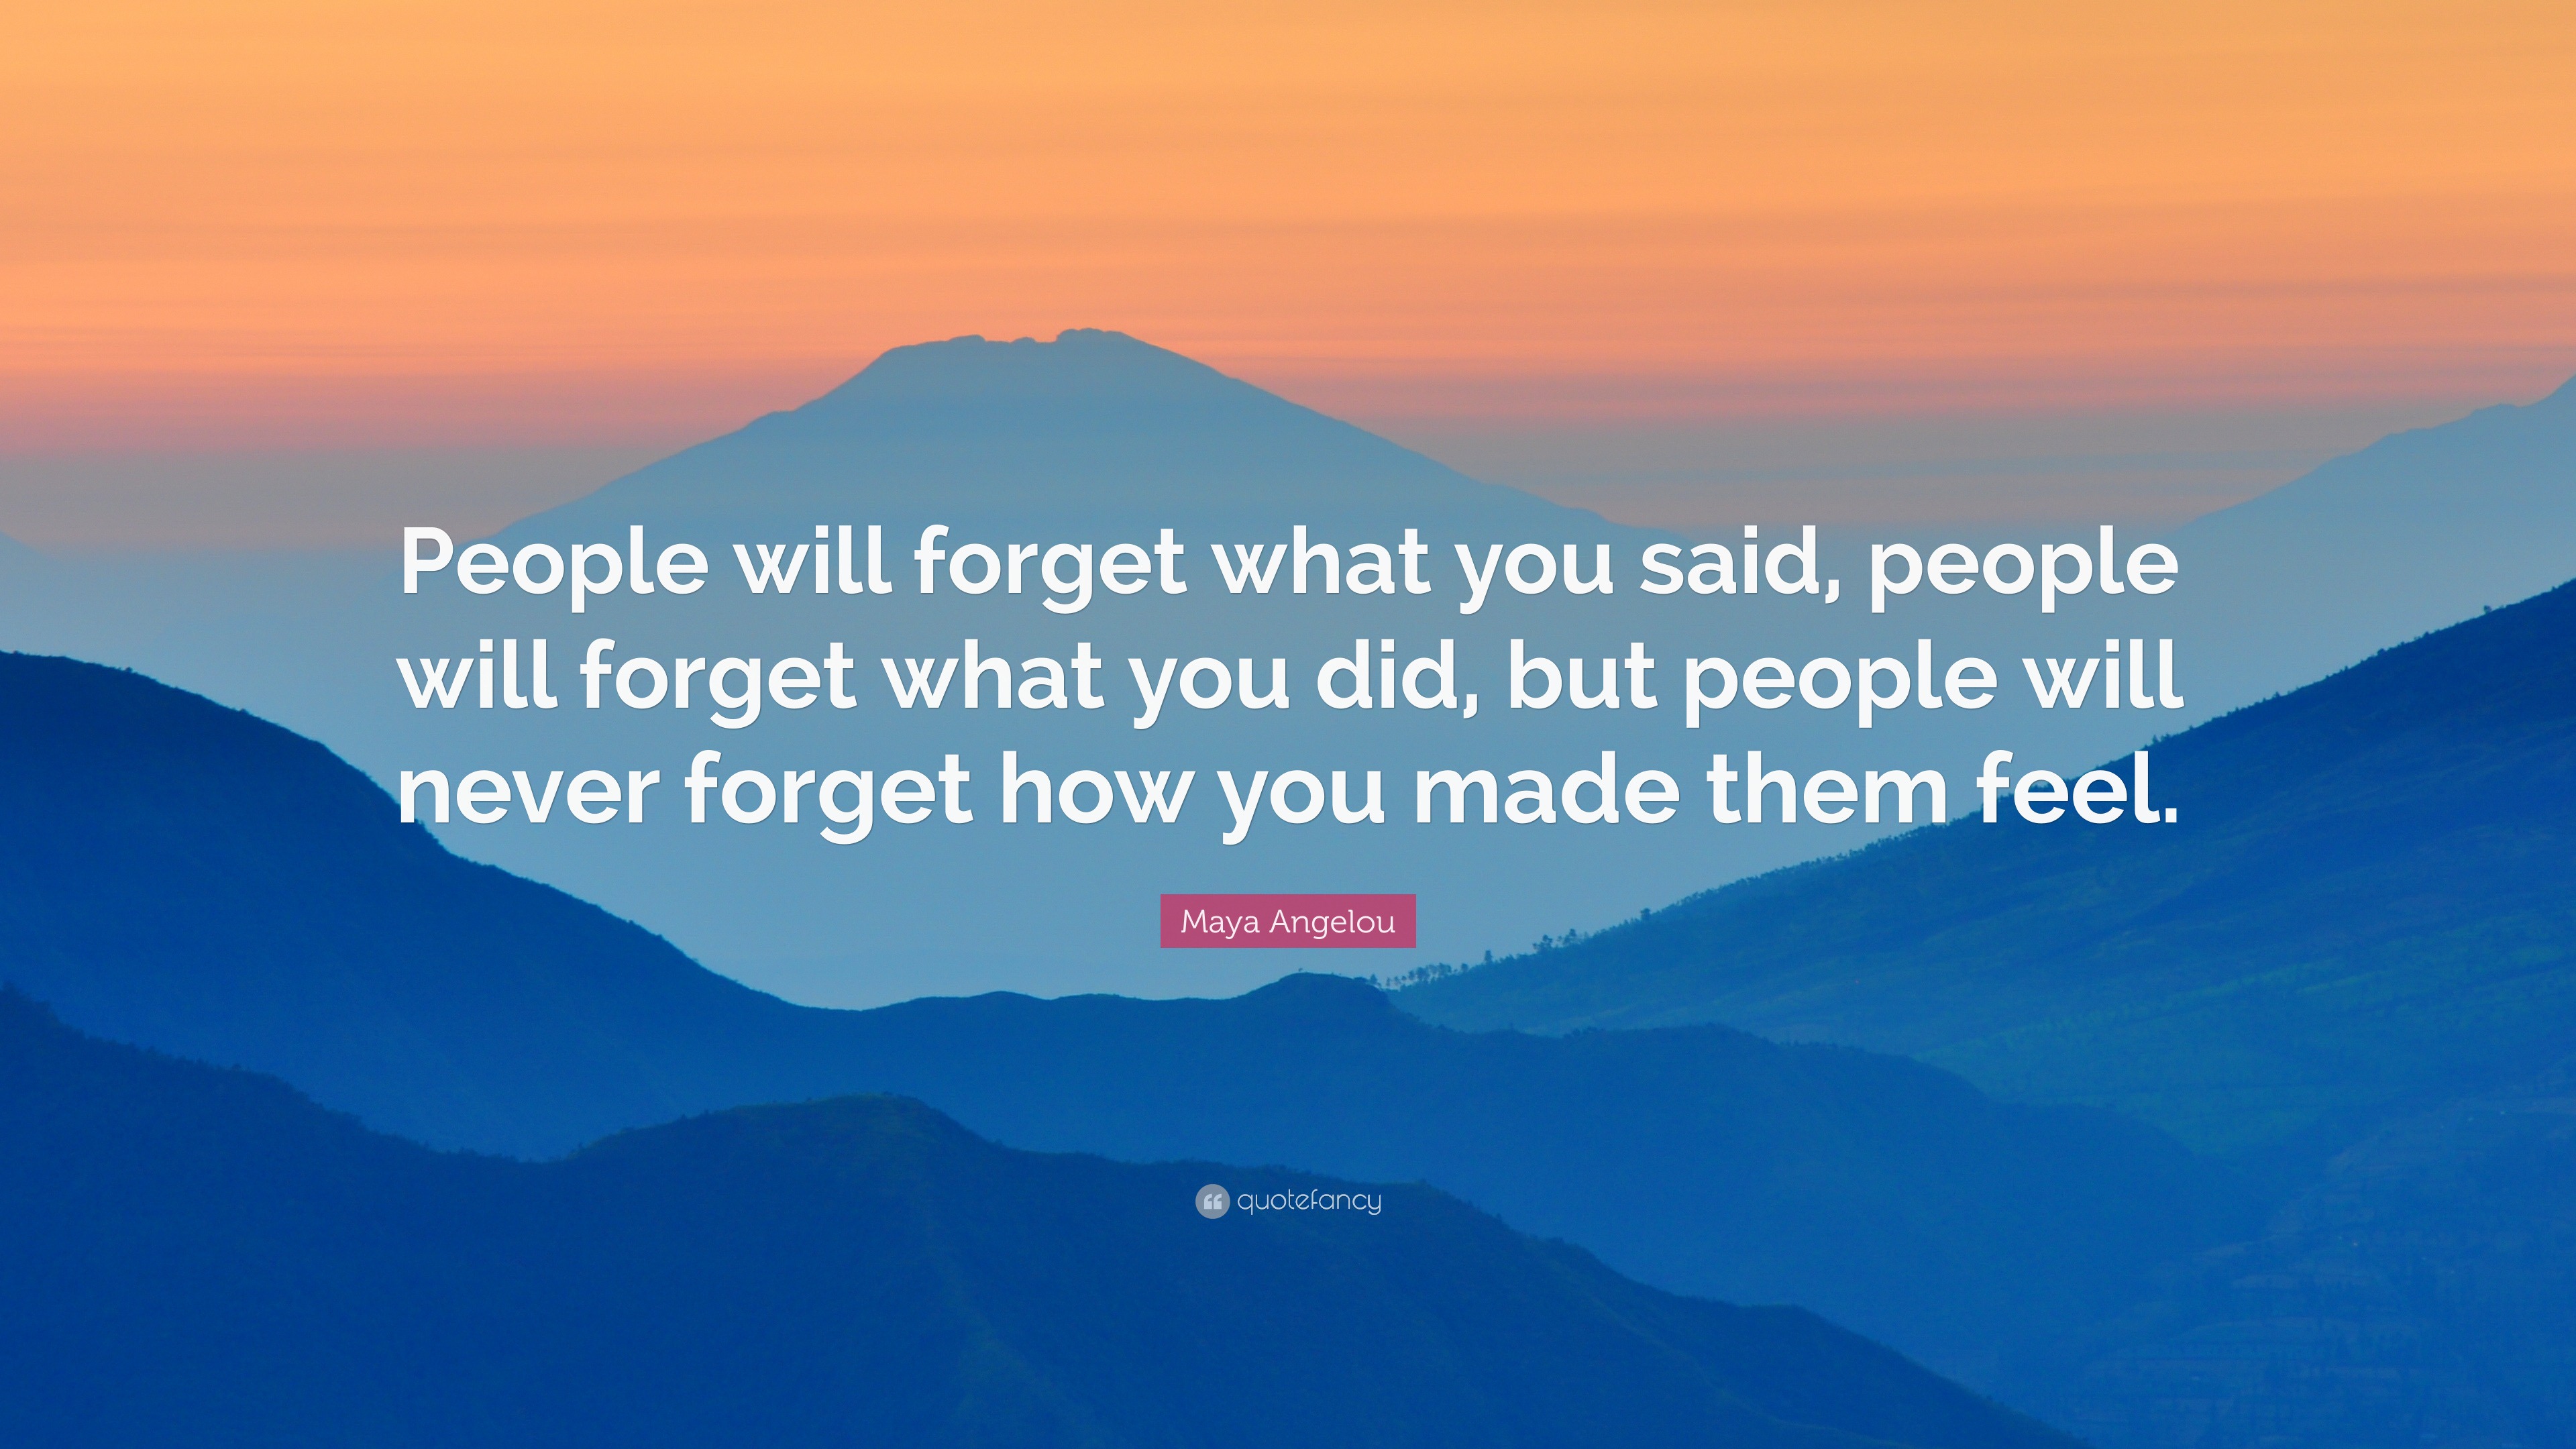 Maya Angelou Quote: “People will forget what you said, people will